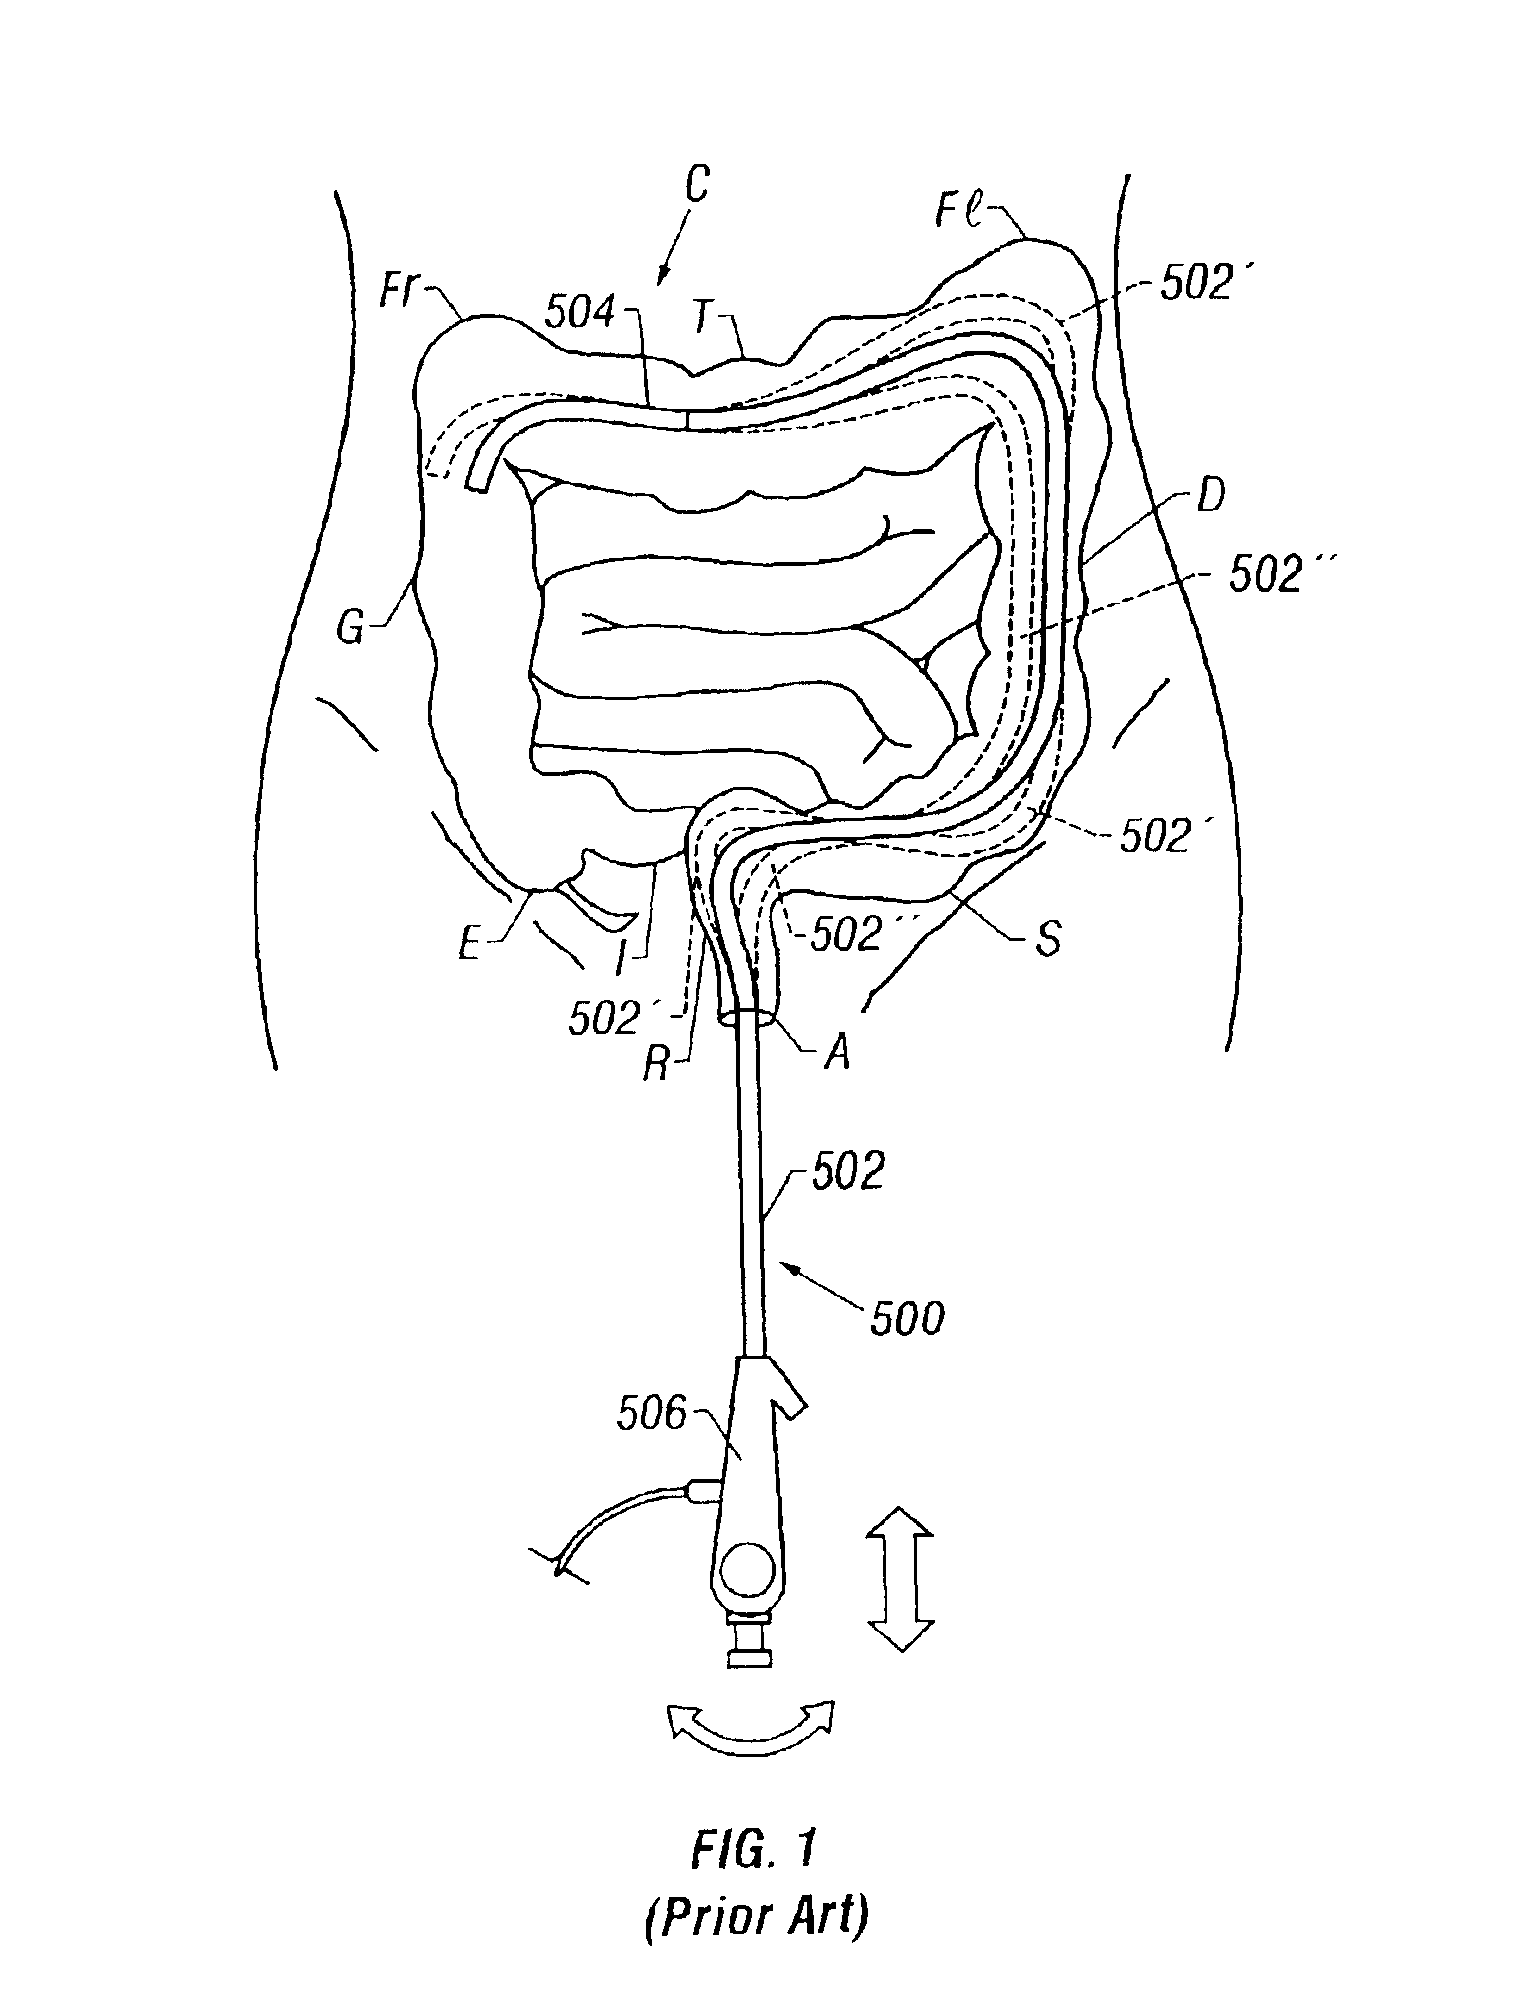 Steerable endoscope and improved method of insertion